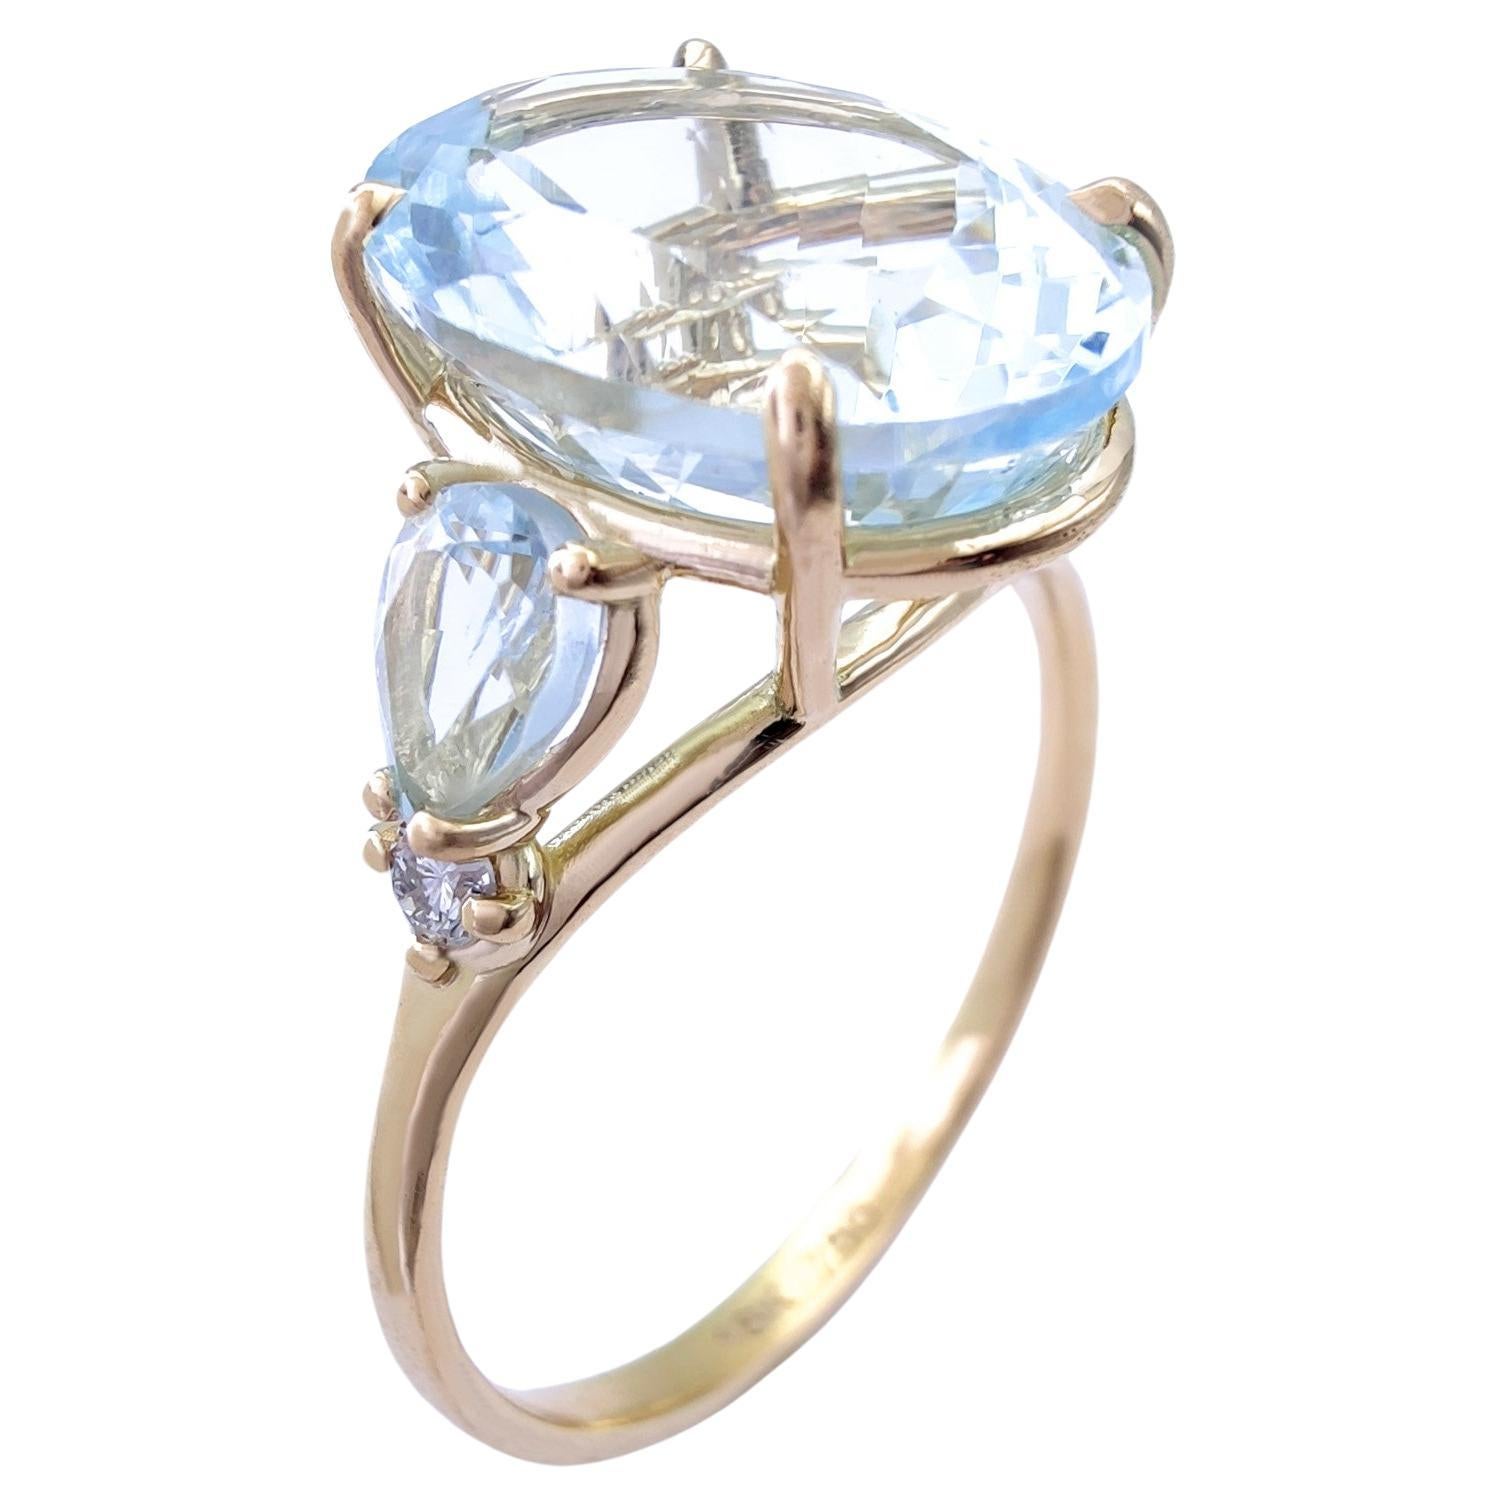 4.3ct  Oval Cut  Aquamarine  Ring, 18k Yellow Gold, with diamonds  For Sale